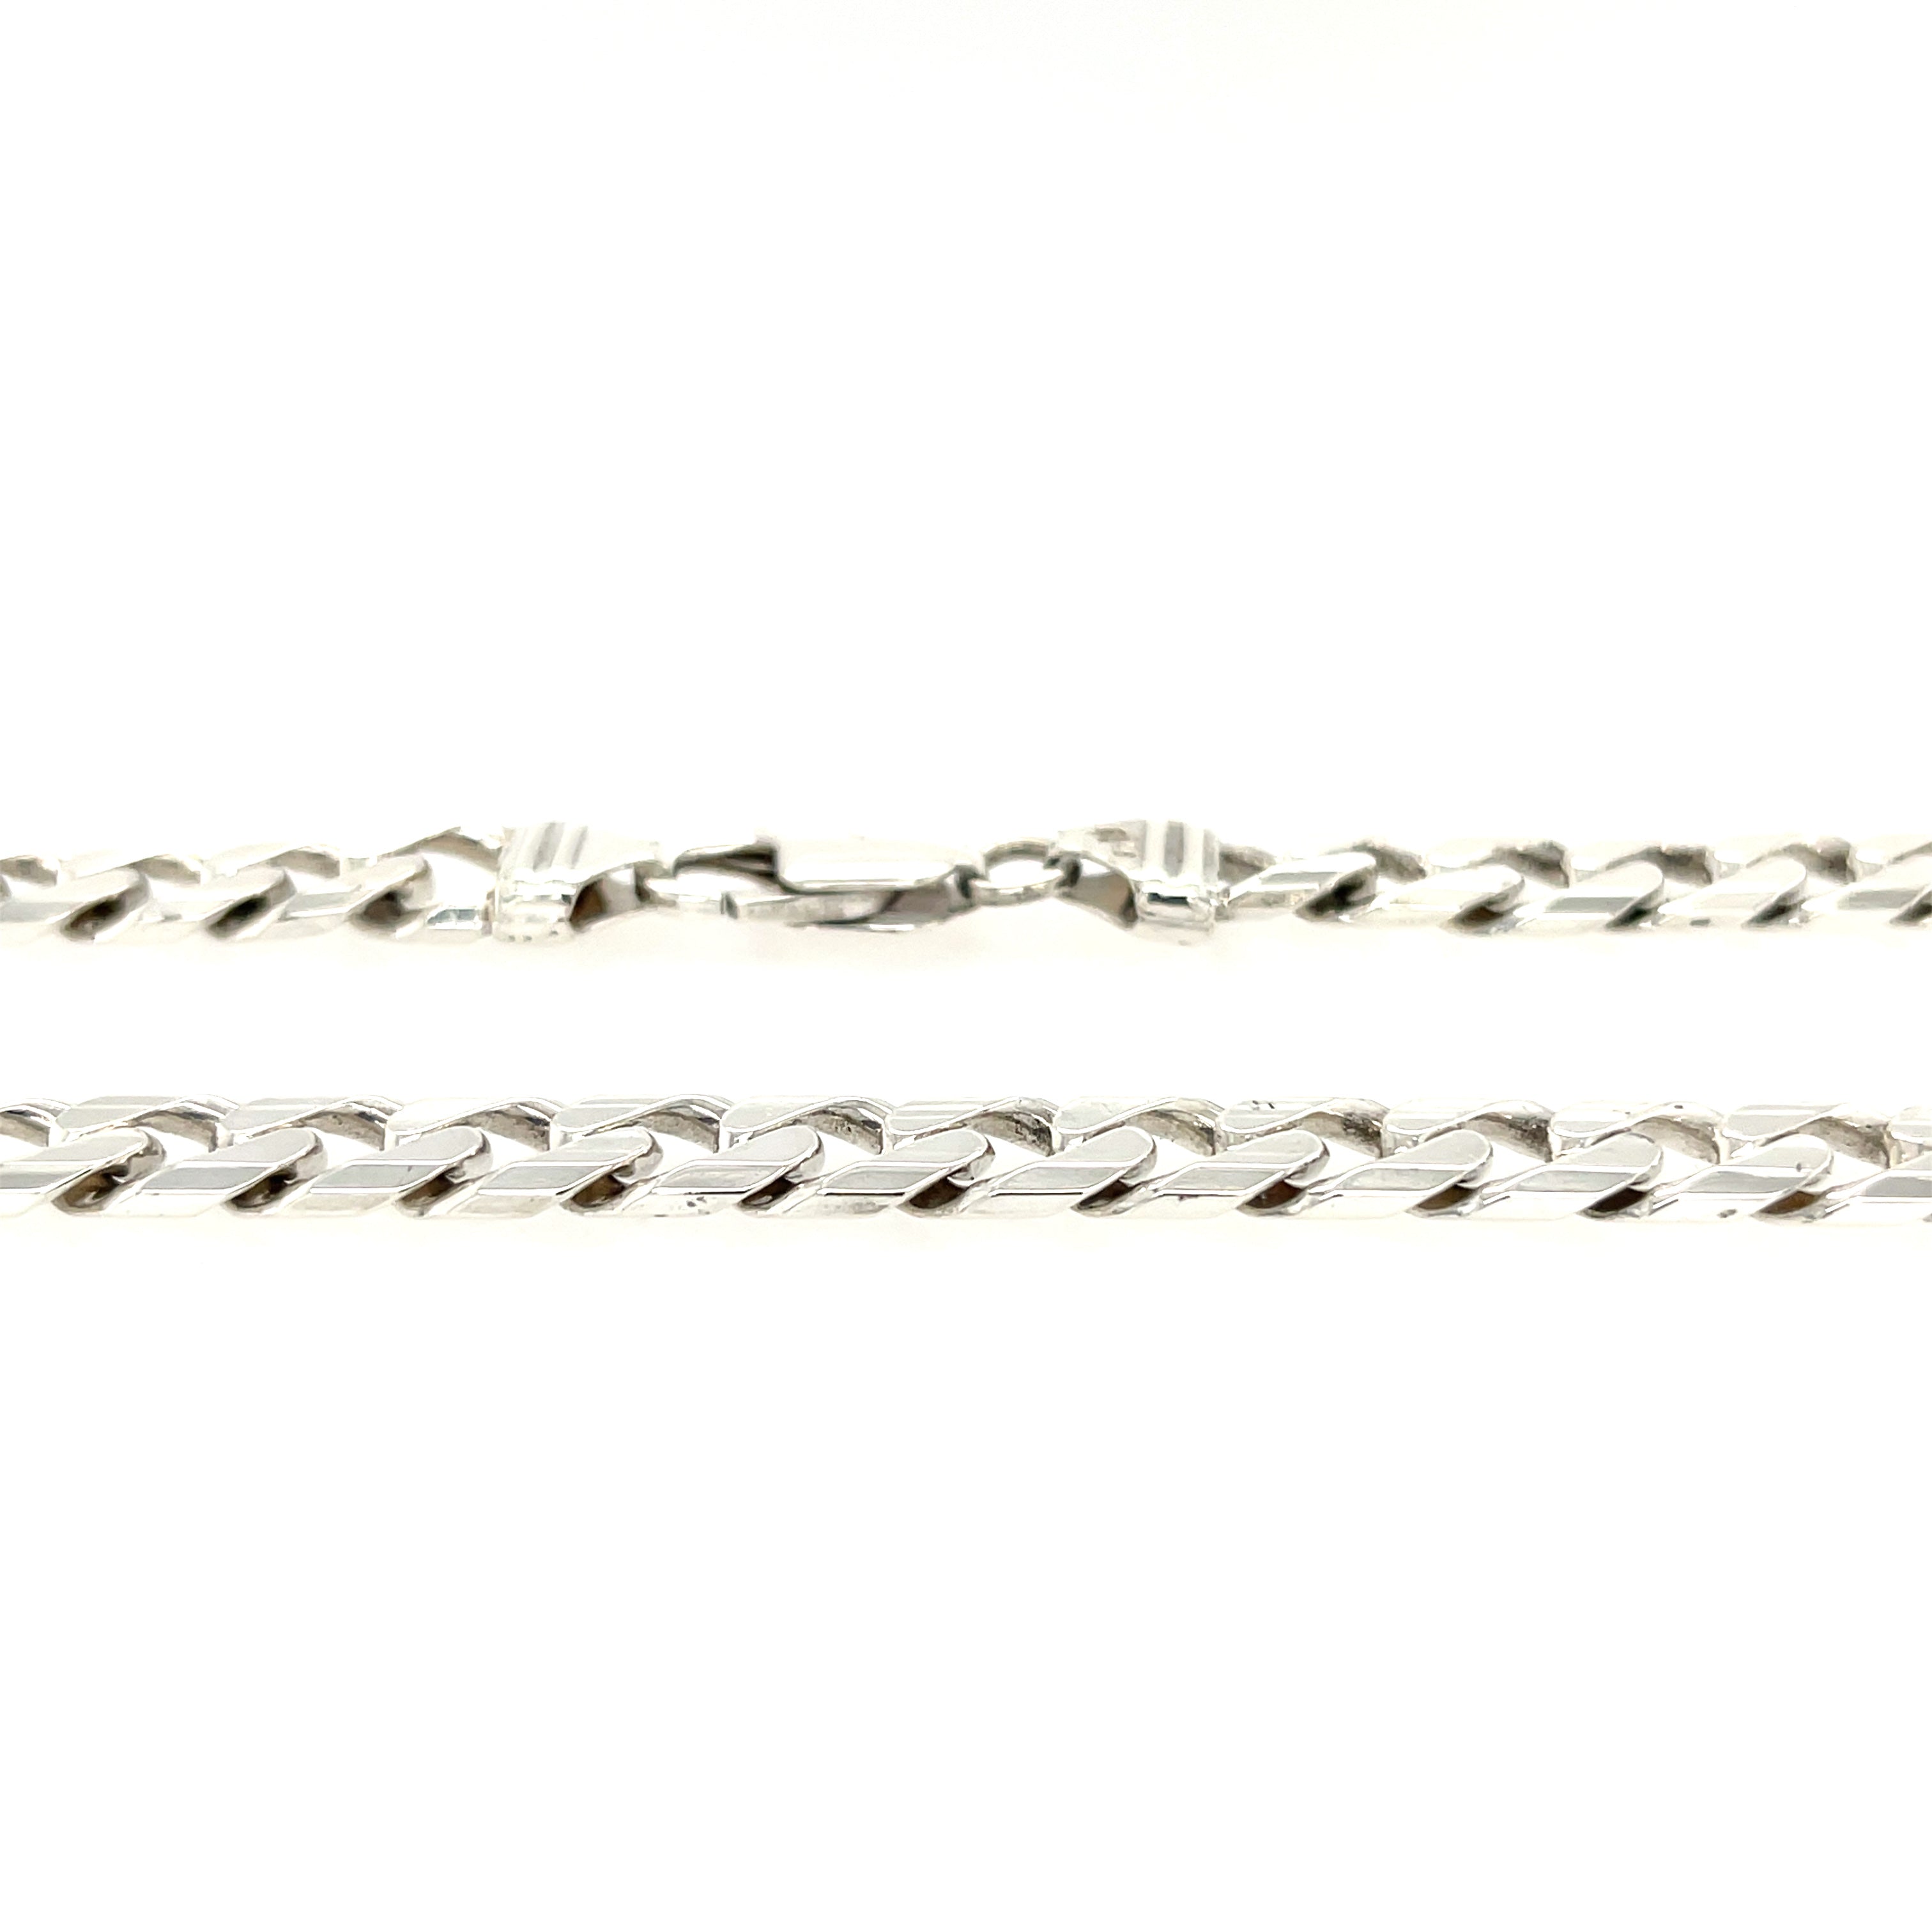 Sterling Silver (925) 20 Inch Classic Curb Link Chain - 48.57g SOLD